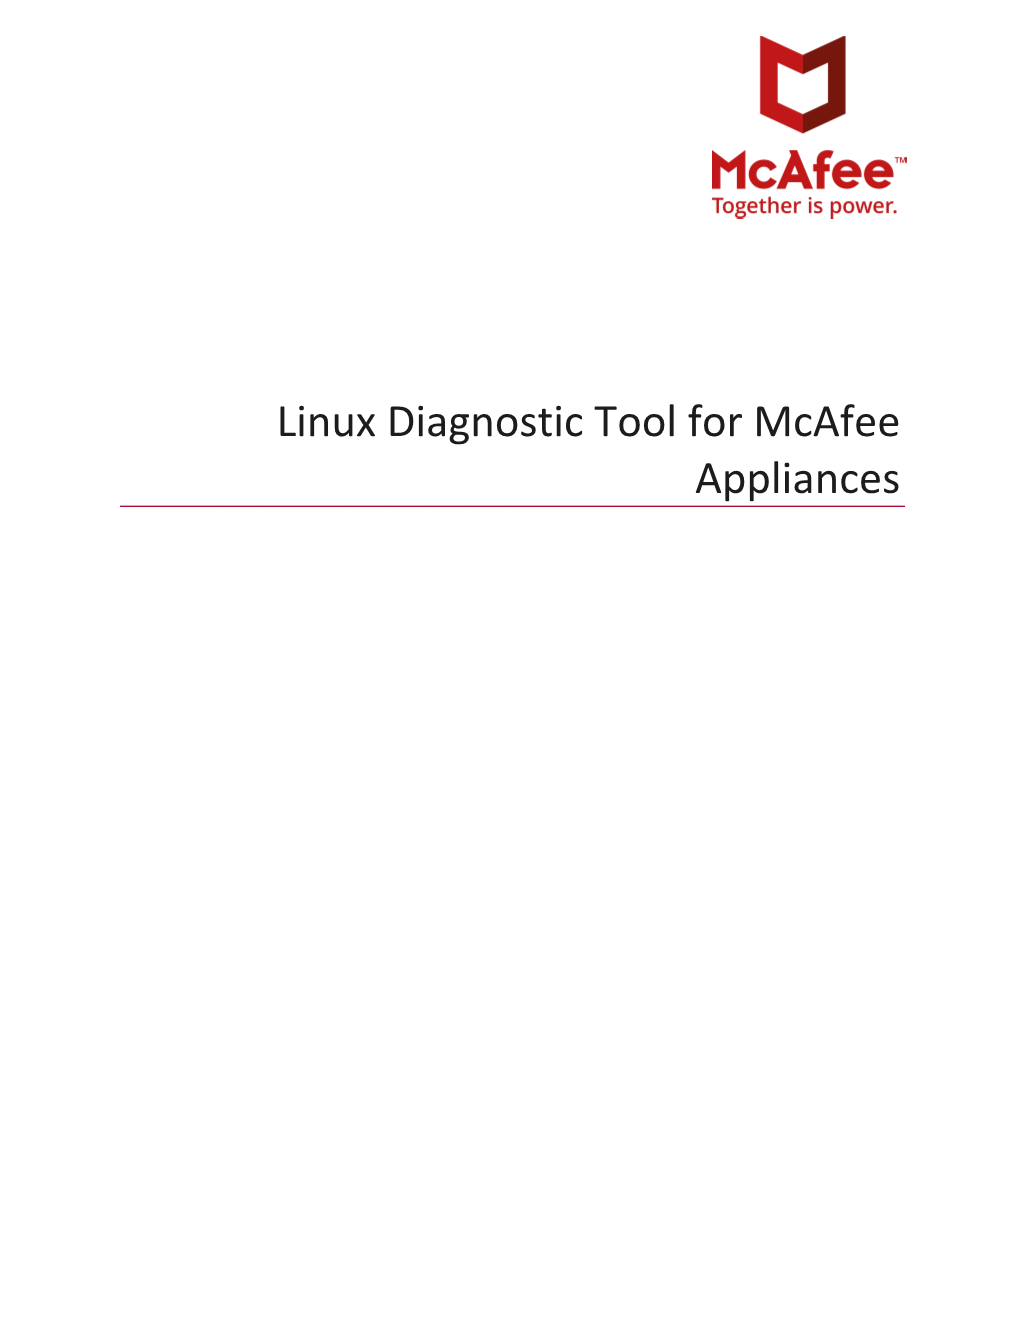 Linux Diagnostic Tool for Mcafee Appliances